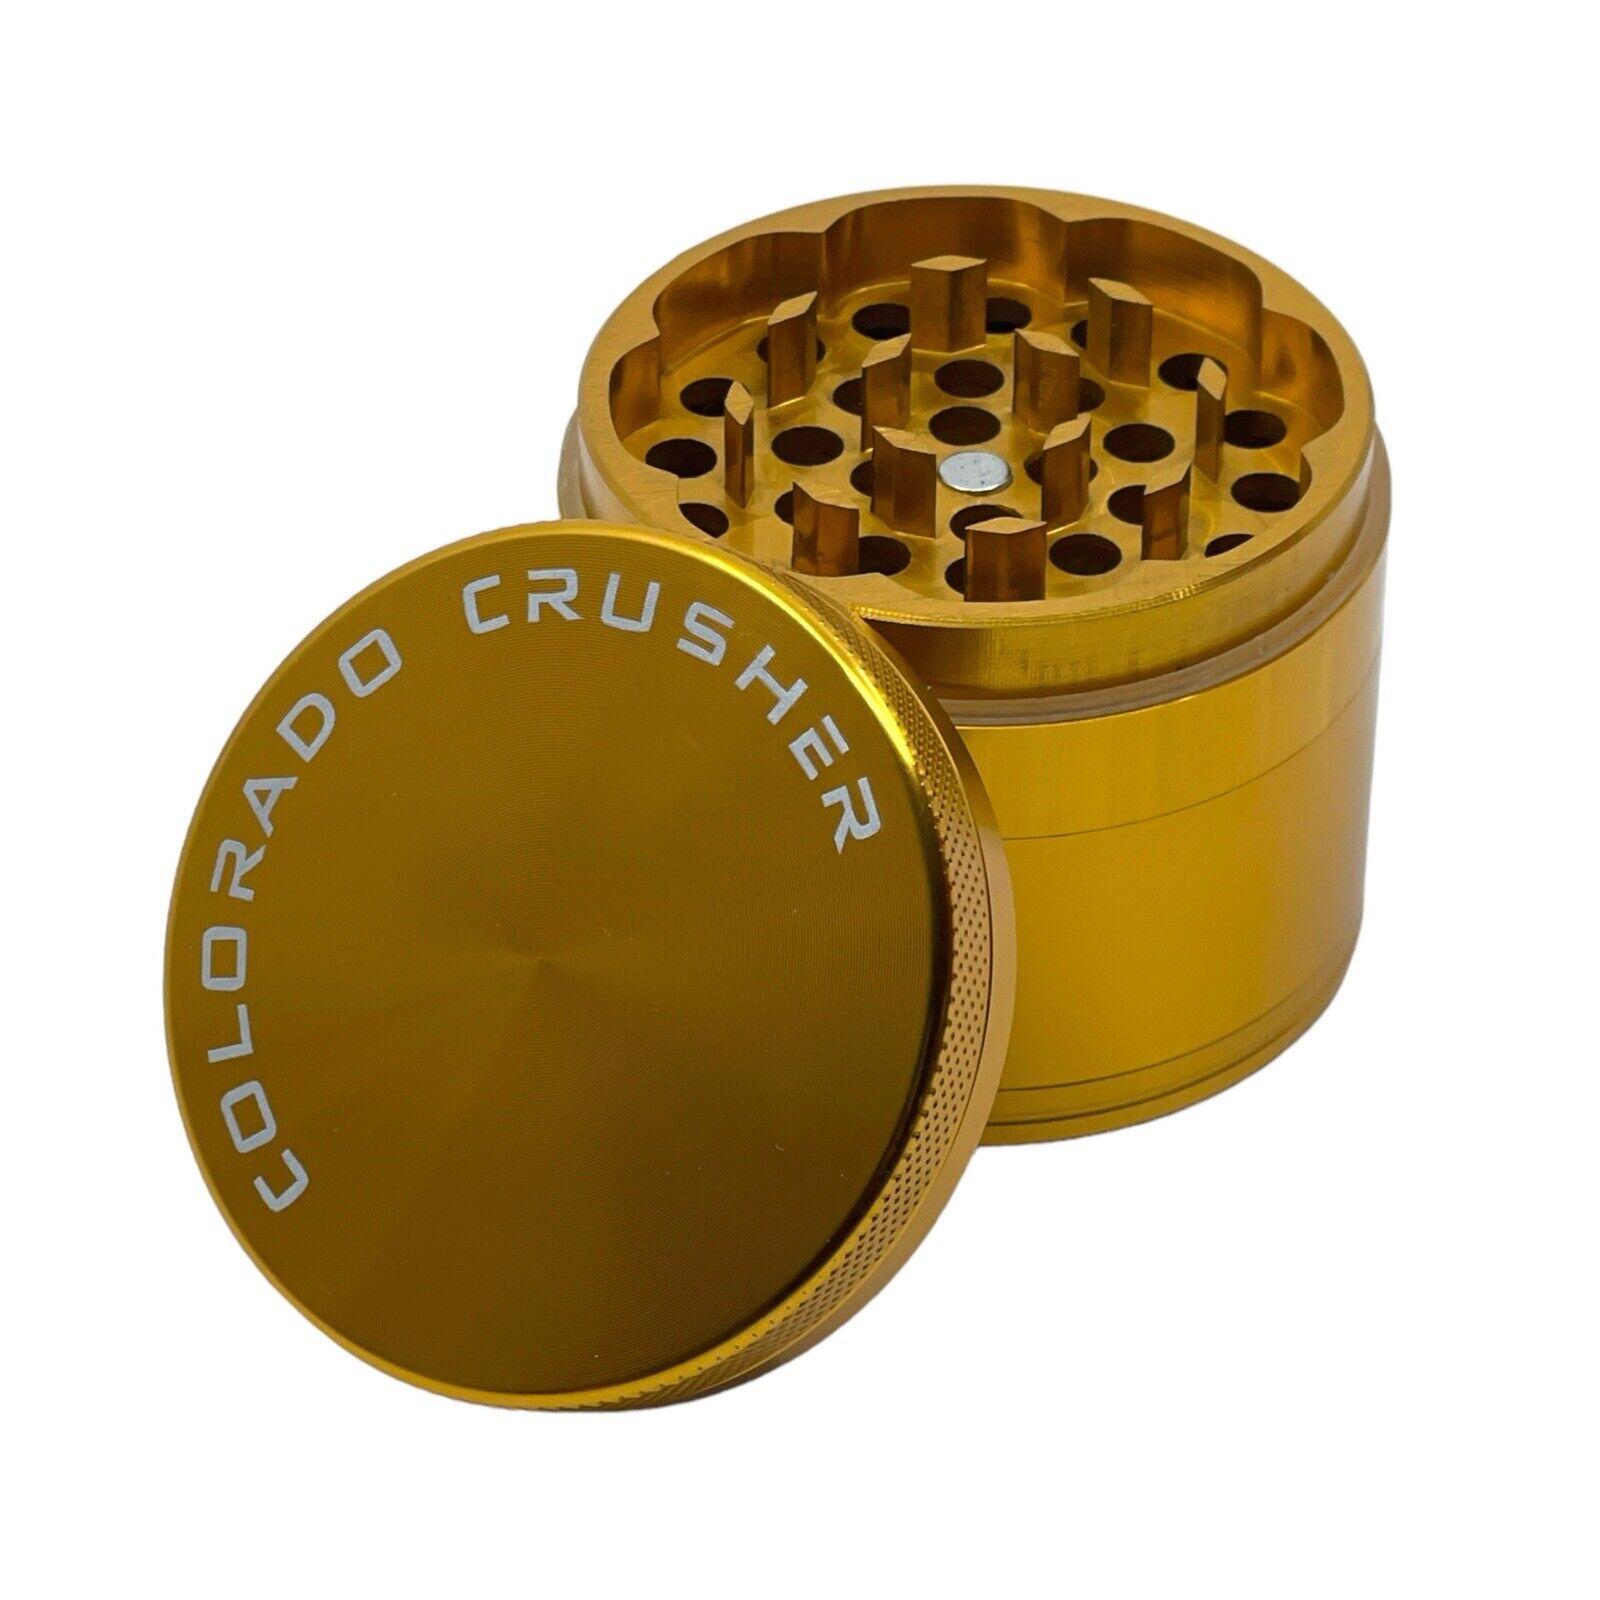 Colorado Crusher 56 MM Tall Herb Grinder Spice Crusher 4 Piece Gold